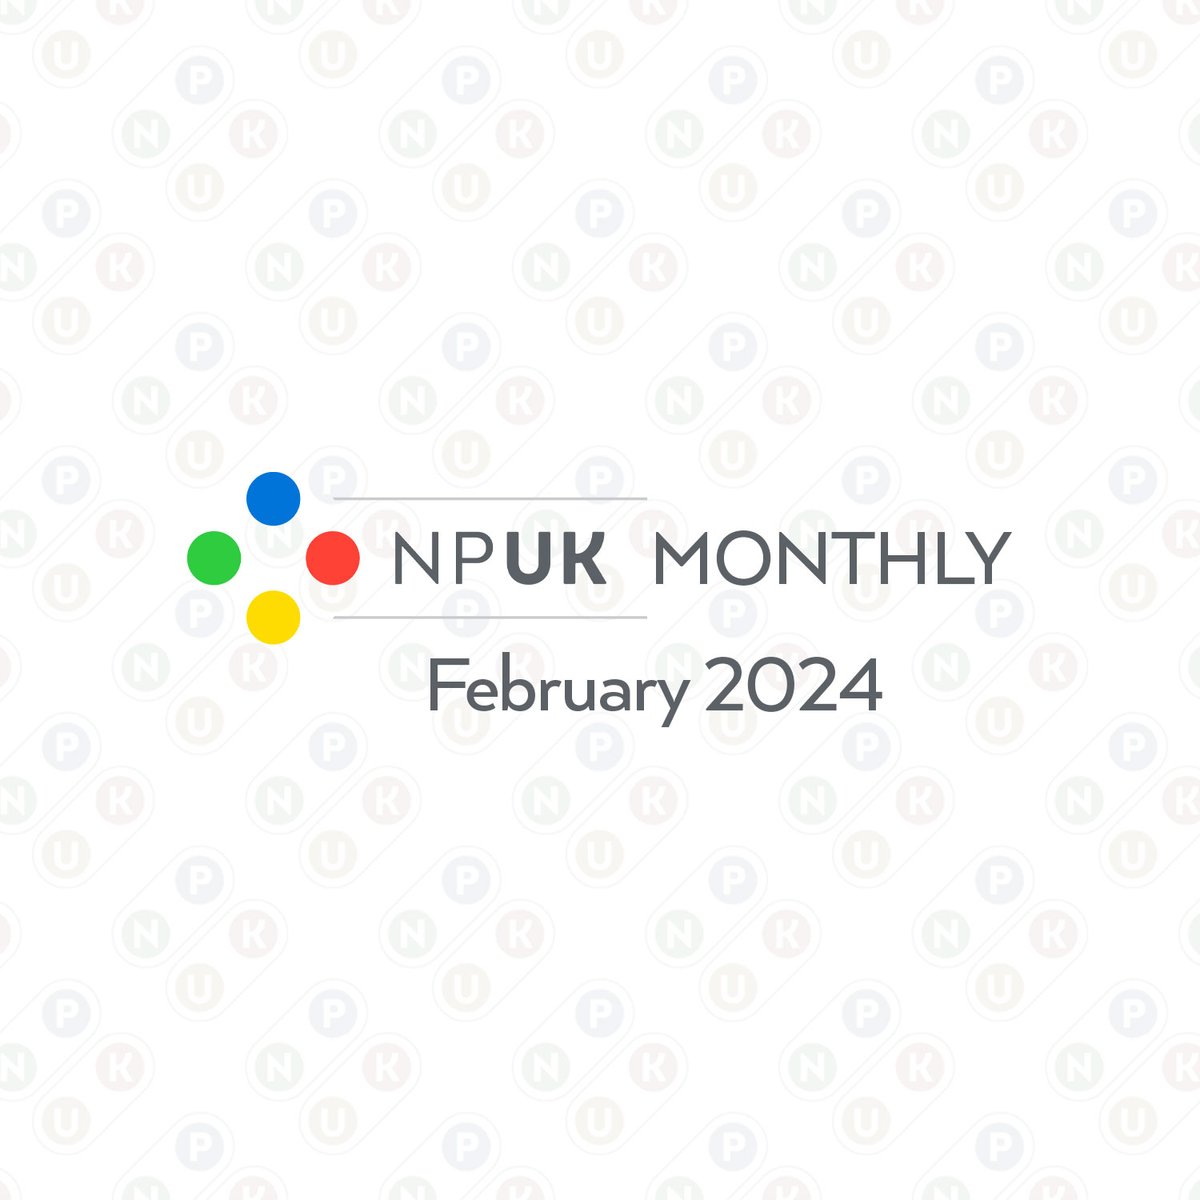 ❤️🎮February is the month of love and passion, and our players love games and are passionate about playing them together! Find out what our local communities got up to last month in the latest NPUK Monthly. 📹 loom.ly/iAX_MC4